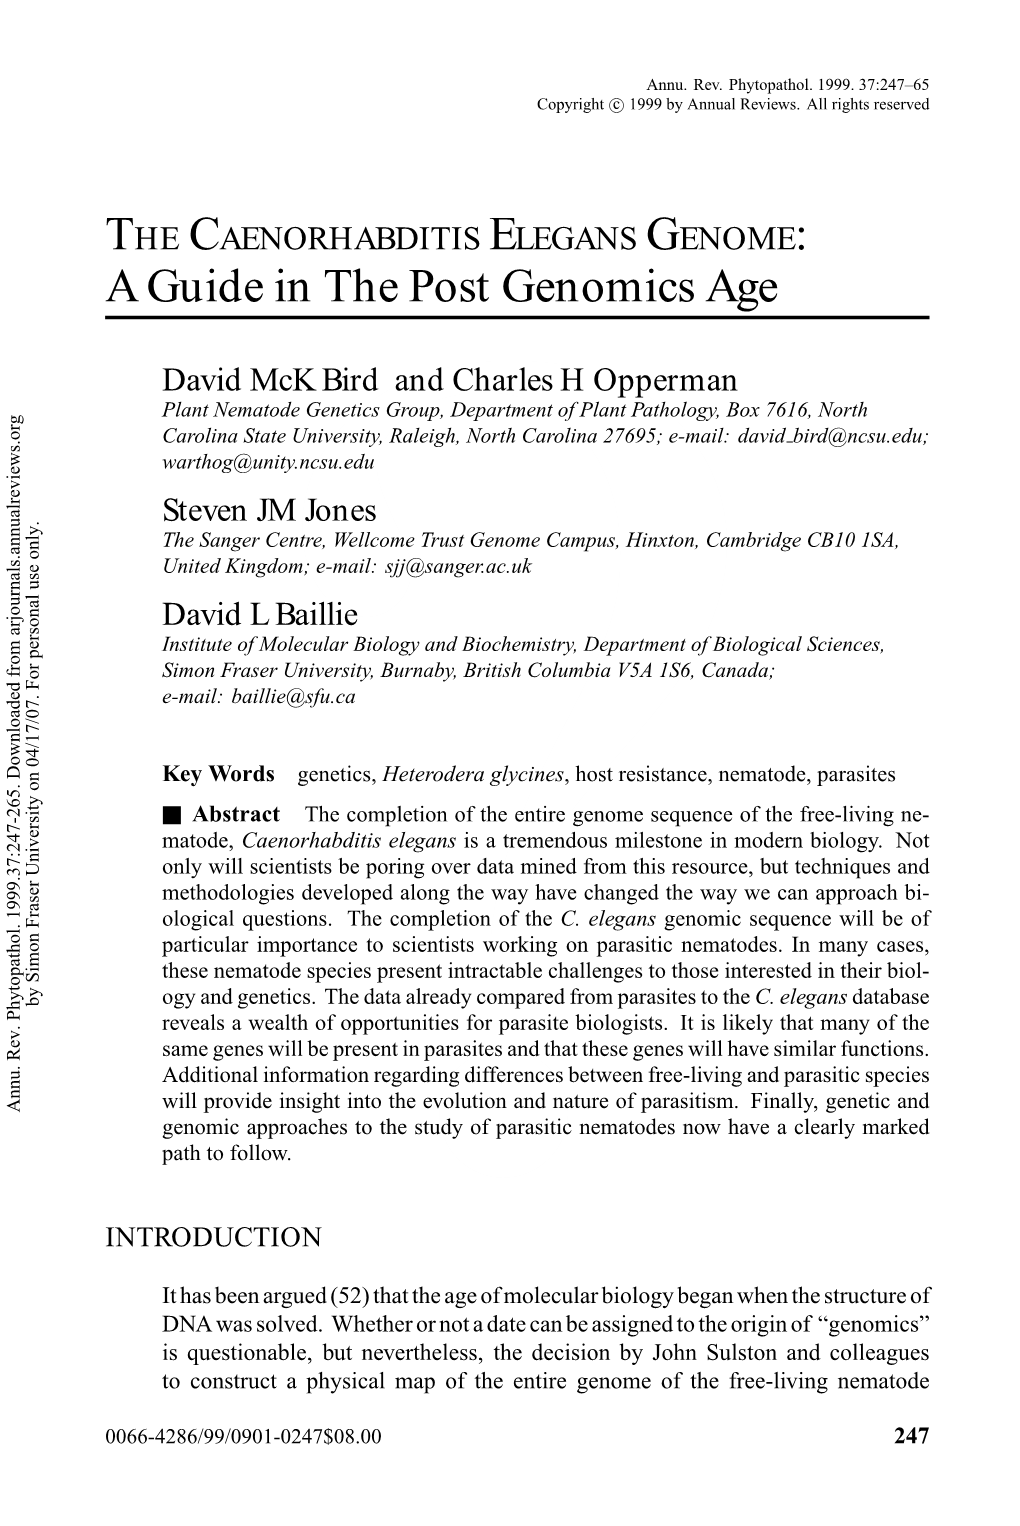 THE CAENORHABDITIS ELEGANS GENOME: a Guide in the Post Genomics Age